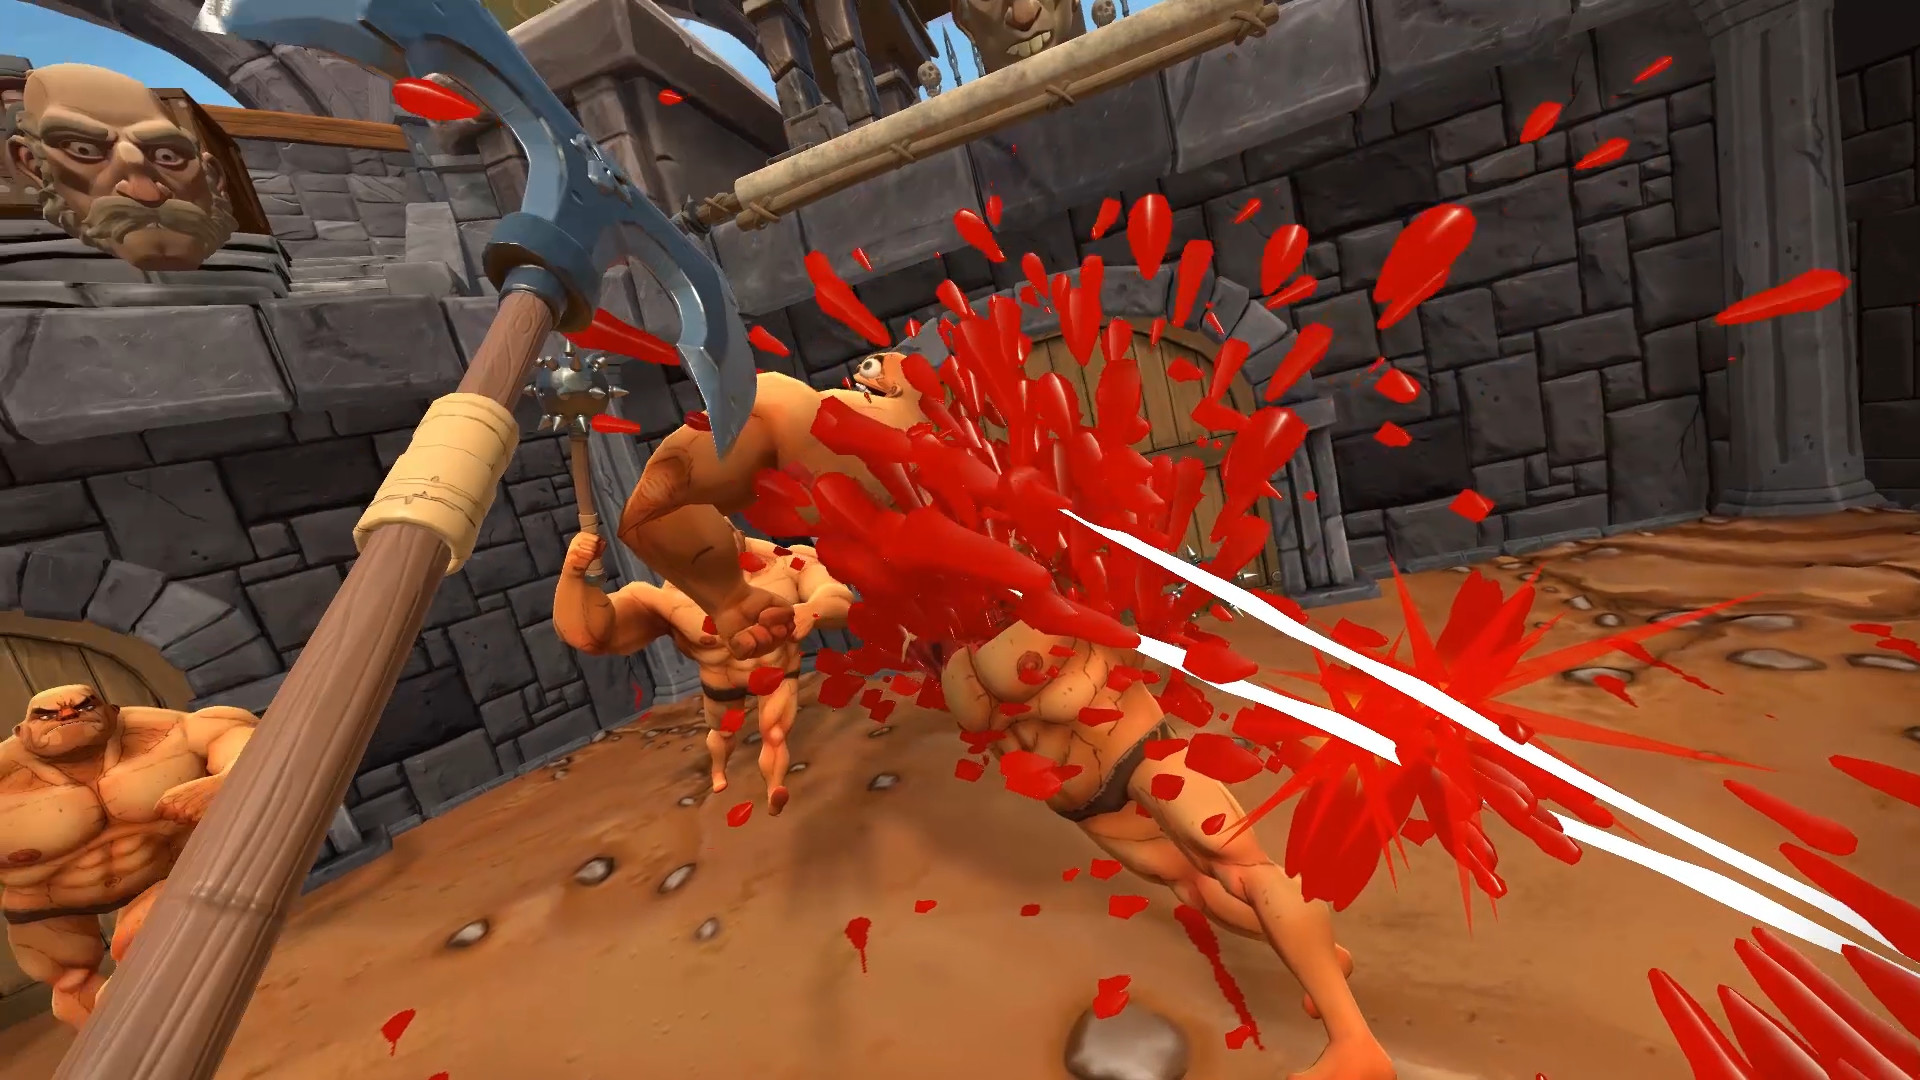 Høring Globus nød Gorn, the VR game about beating the crap out of gladiators, has left Early  Access | PC Gamer